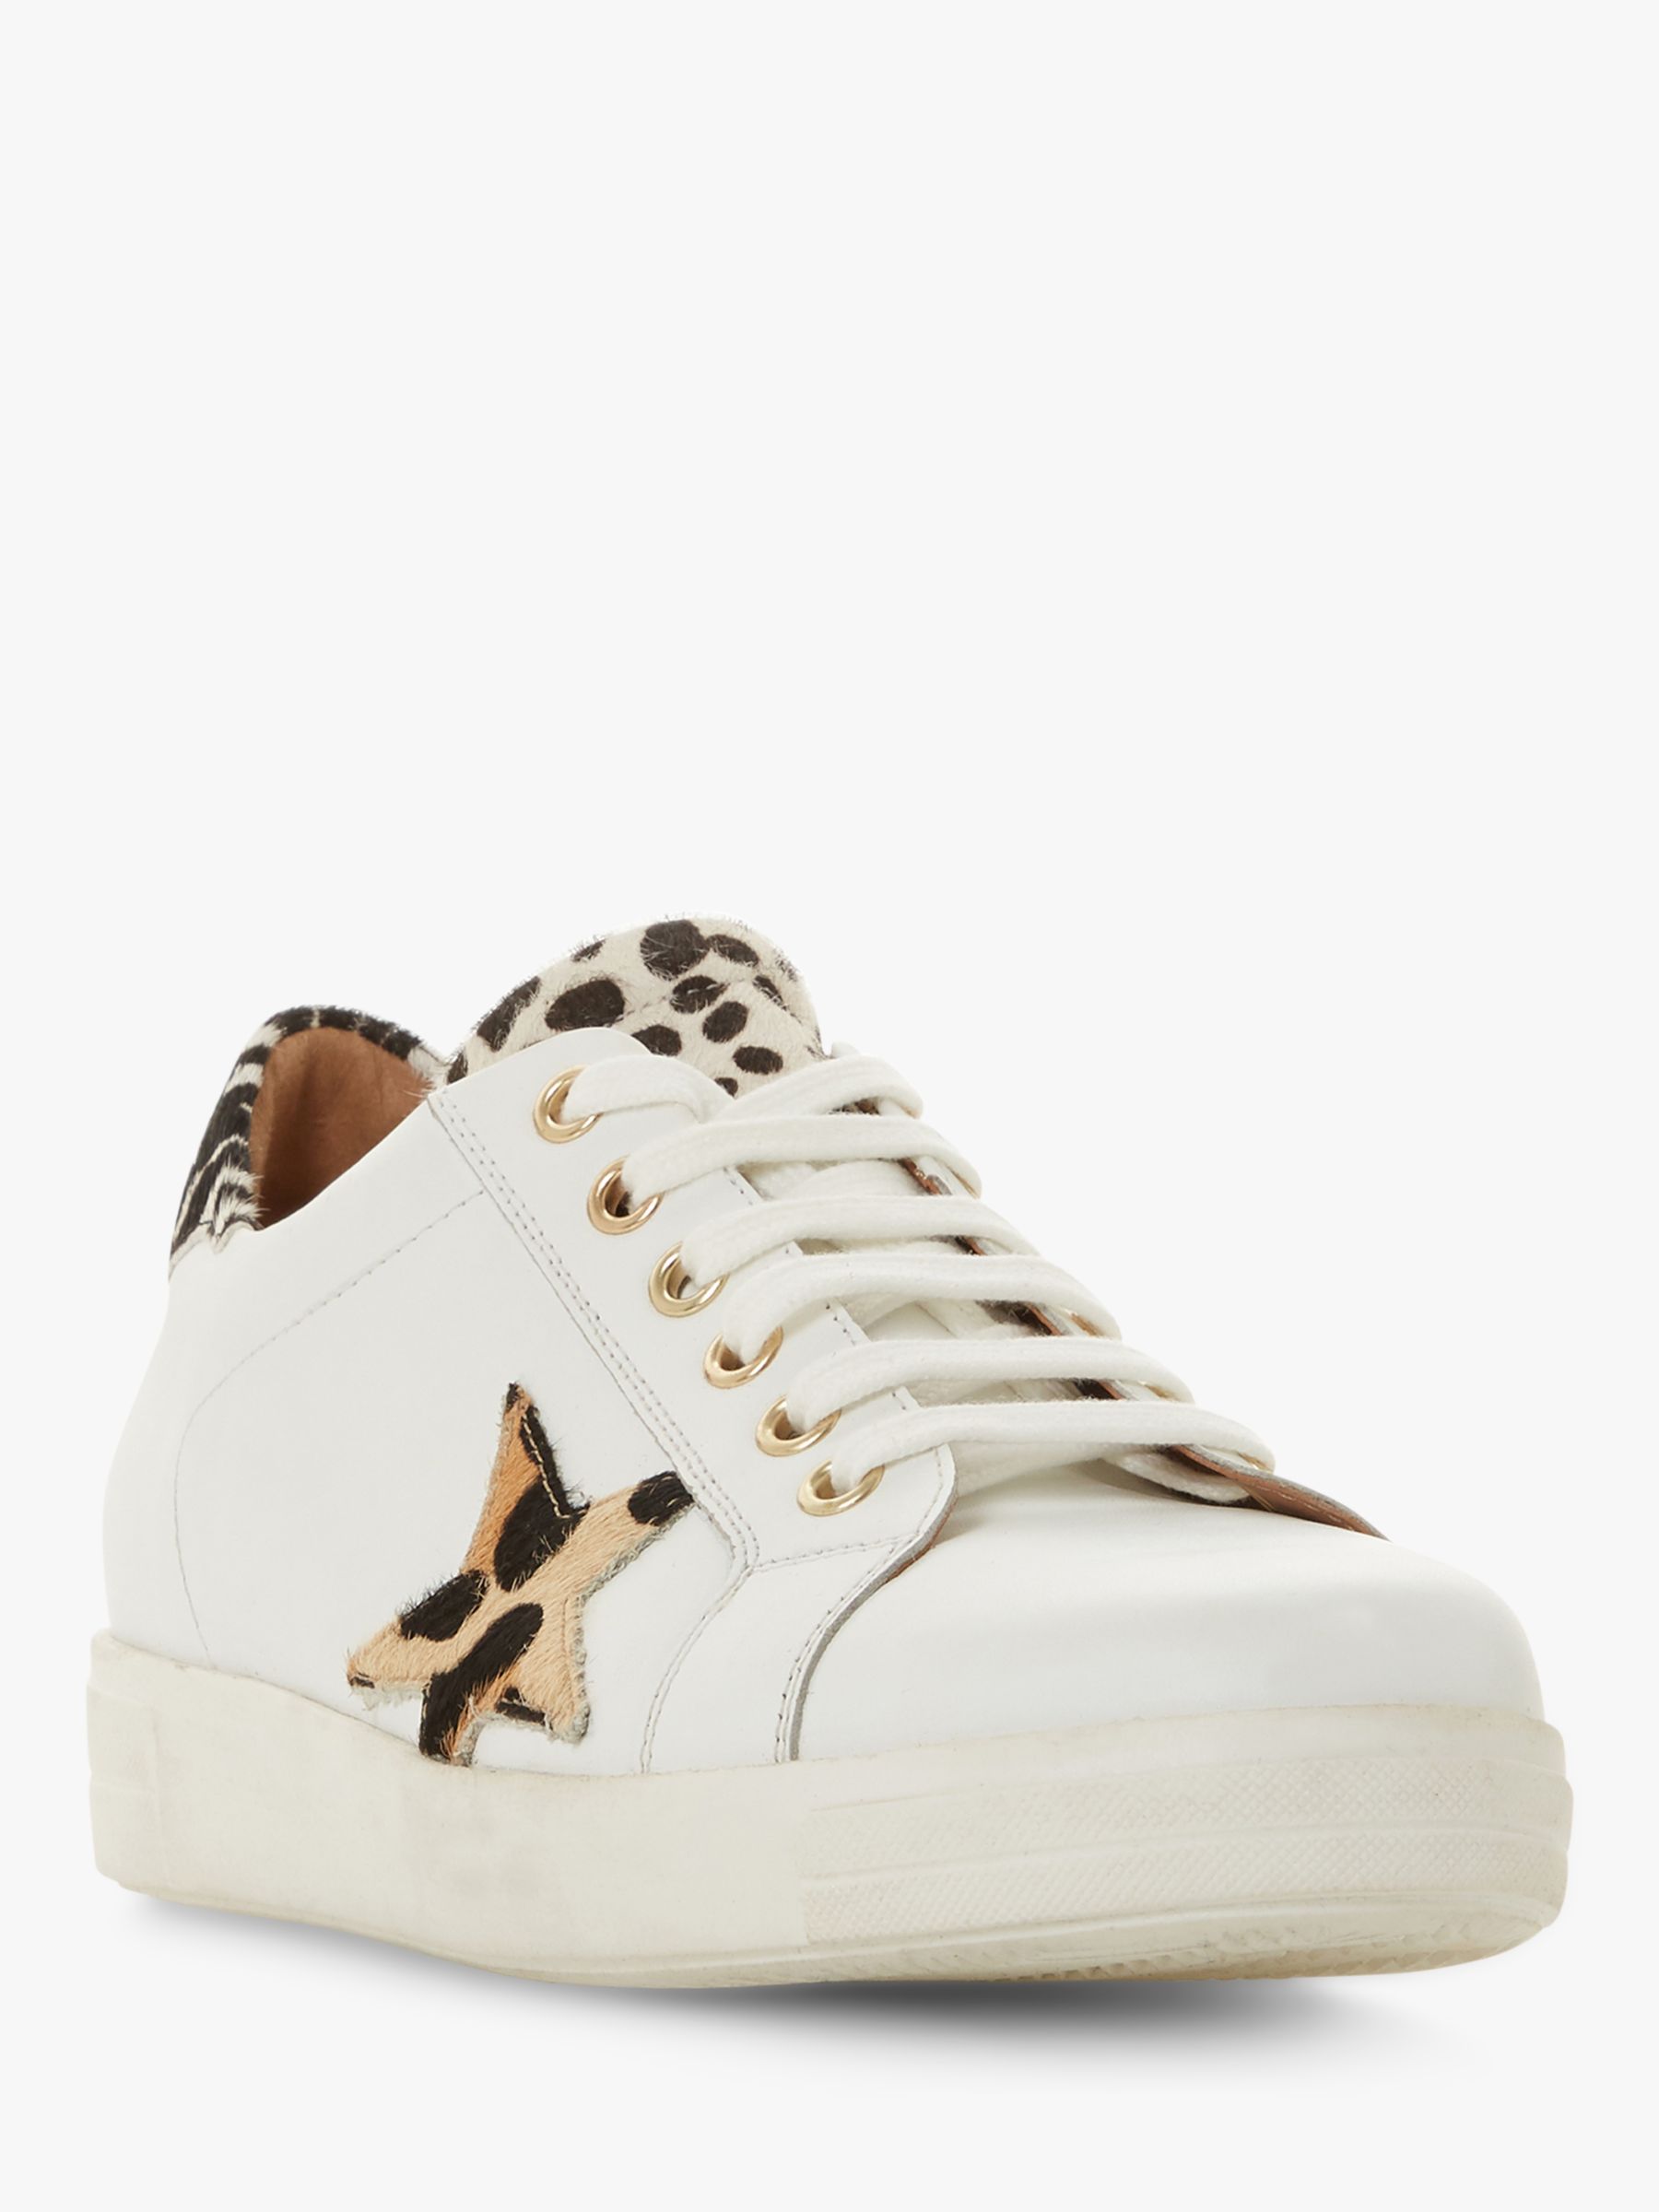 Dune Edris Lace Up Trainers, White Leather